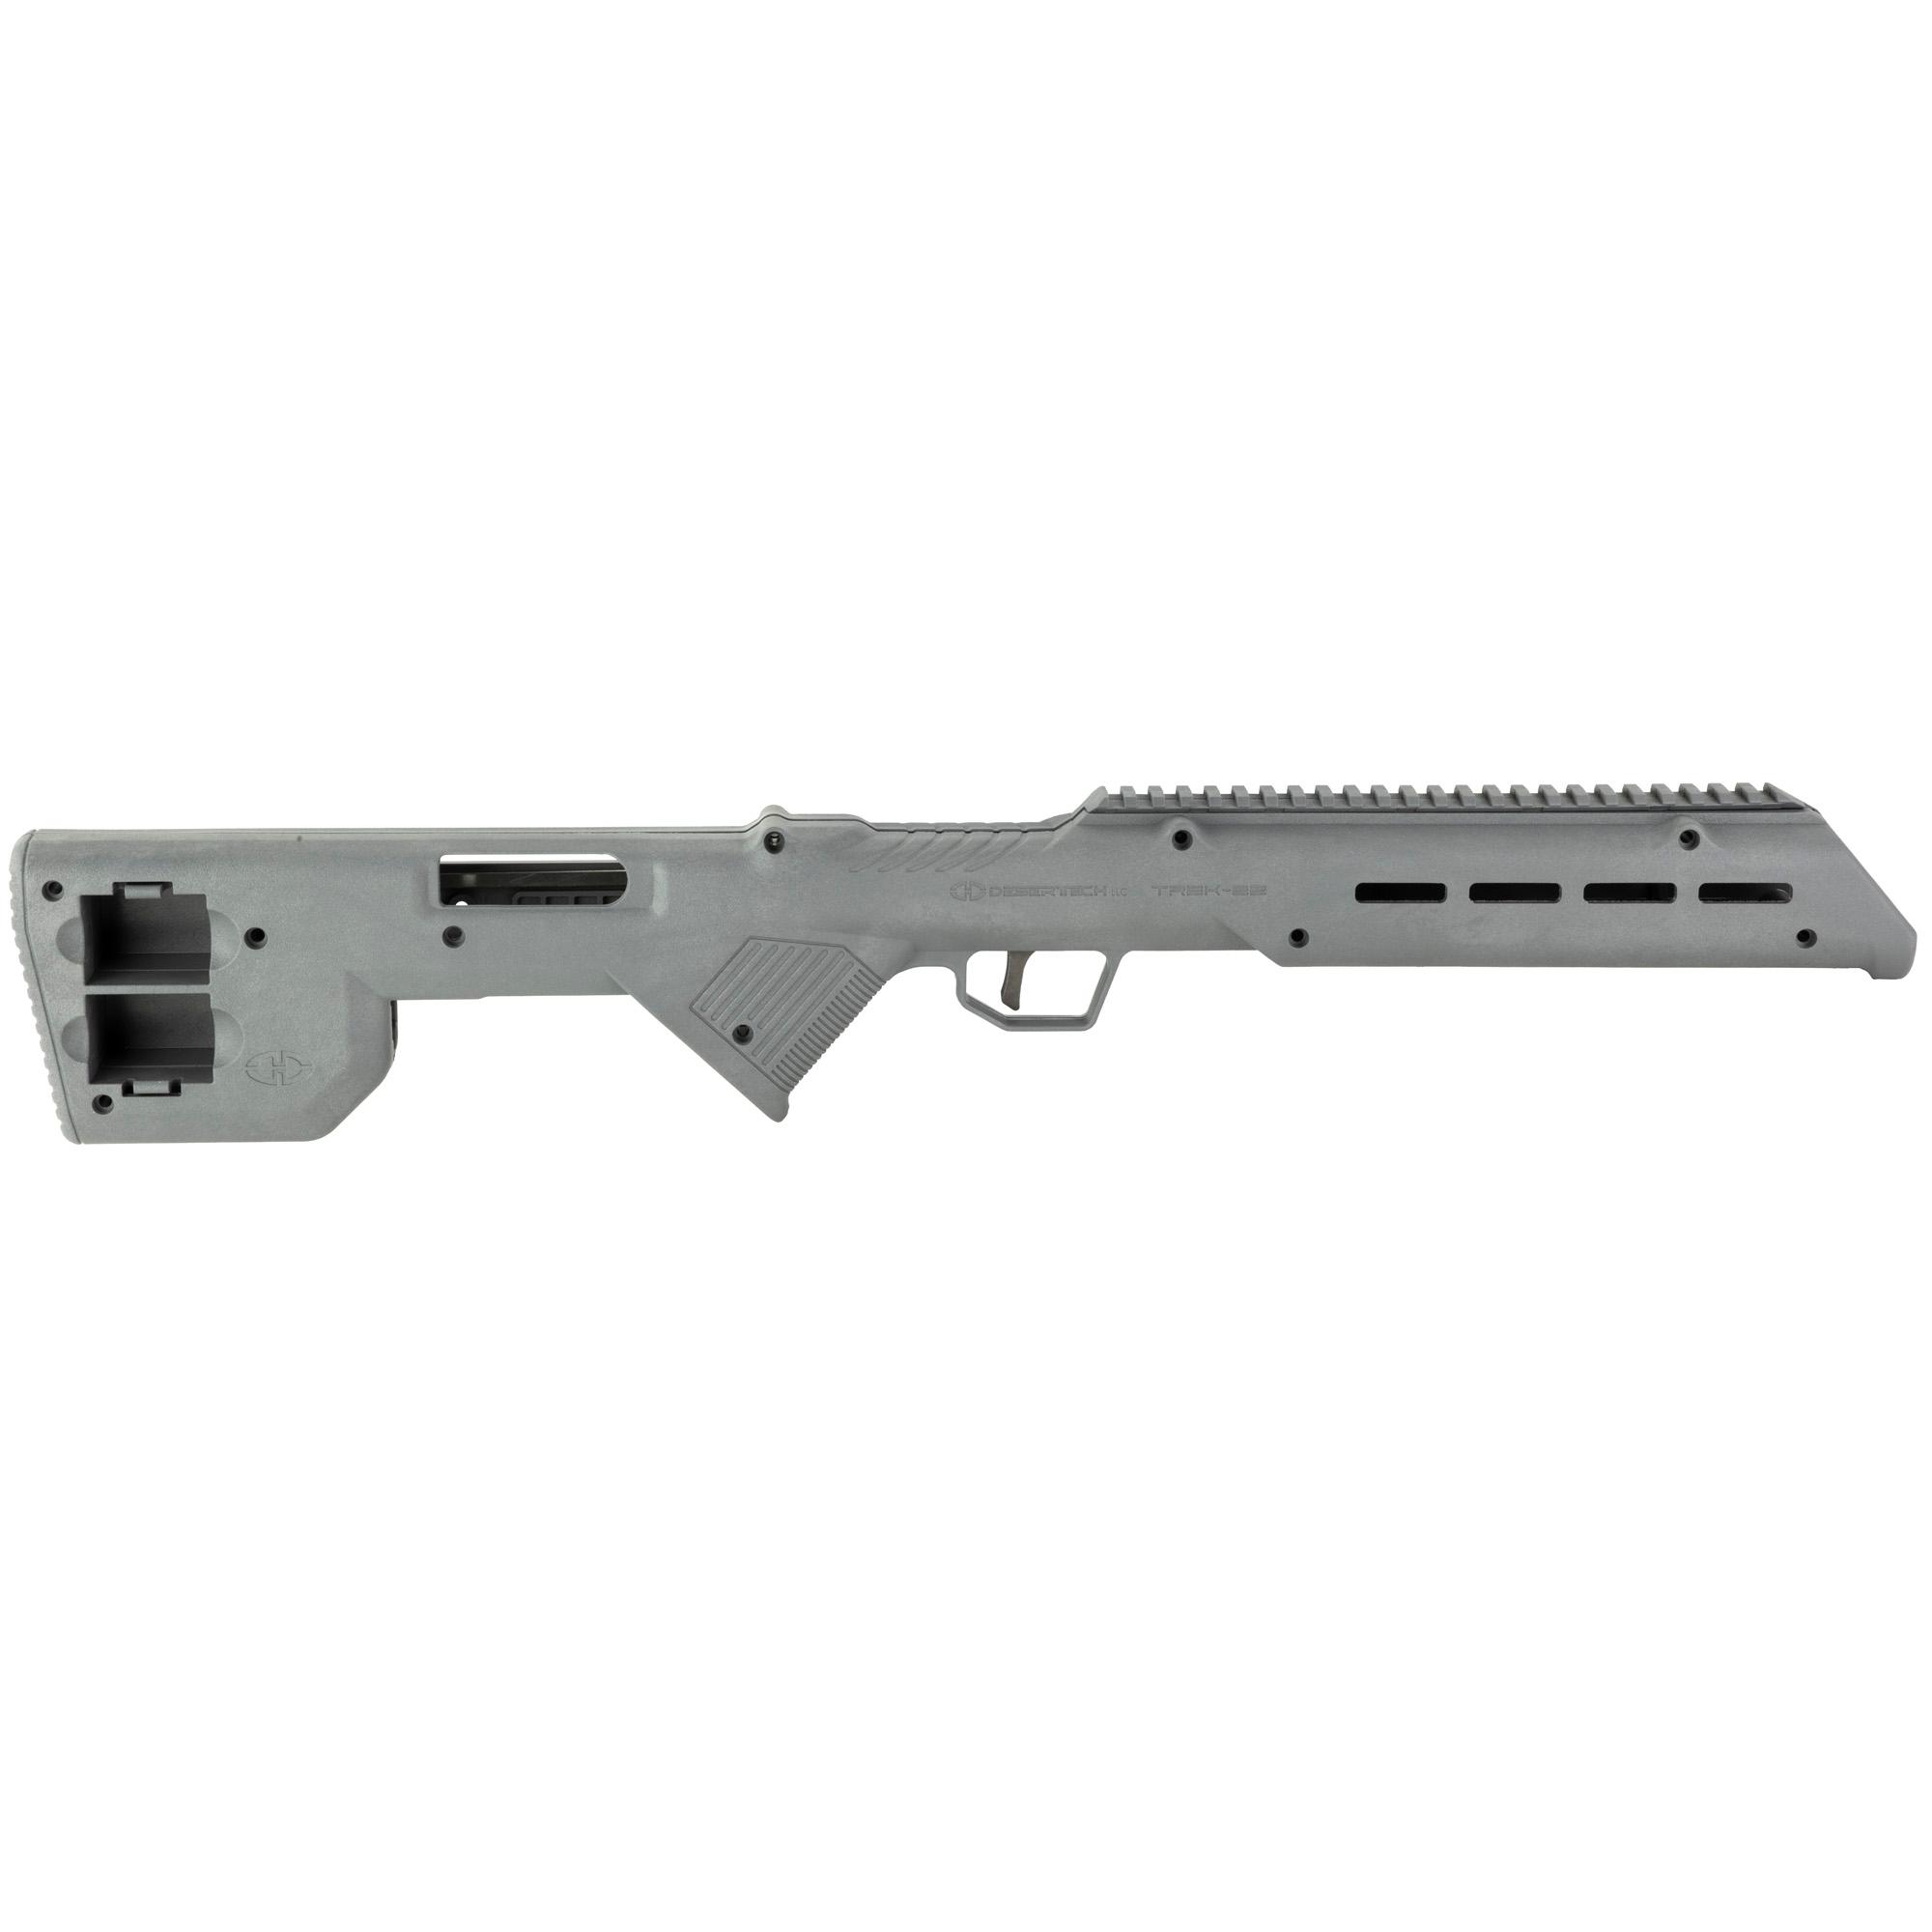 Gun Cleaning DT TREK-22 CHASSIS STOCK KIT GRY image 2